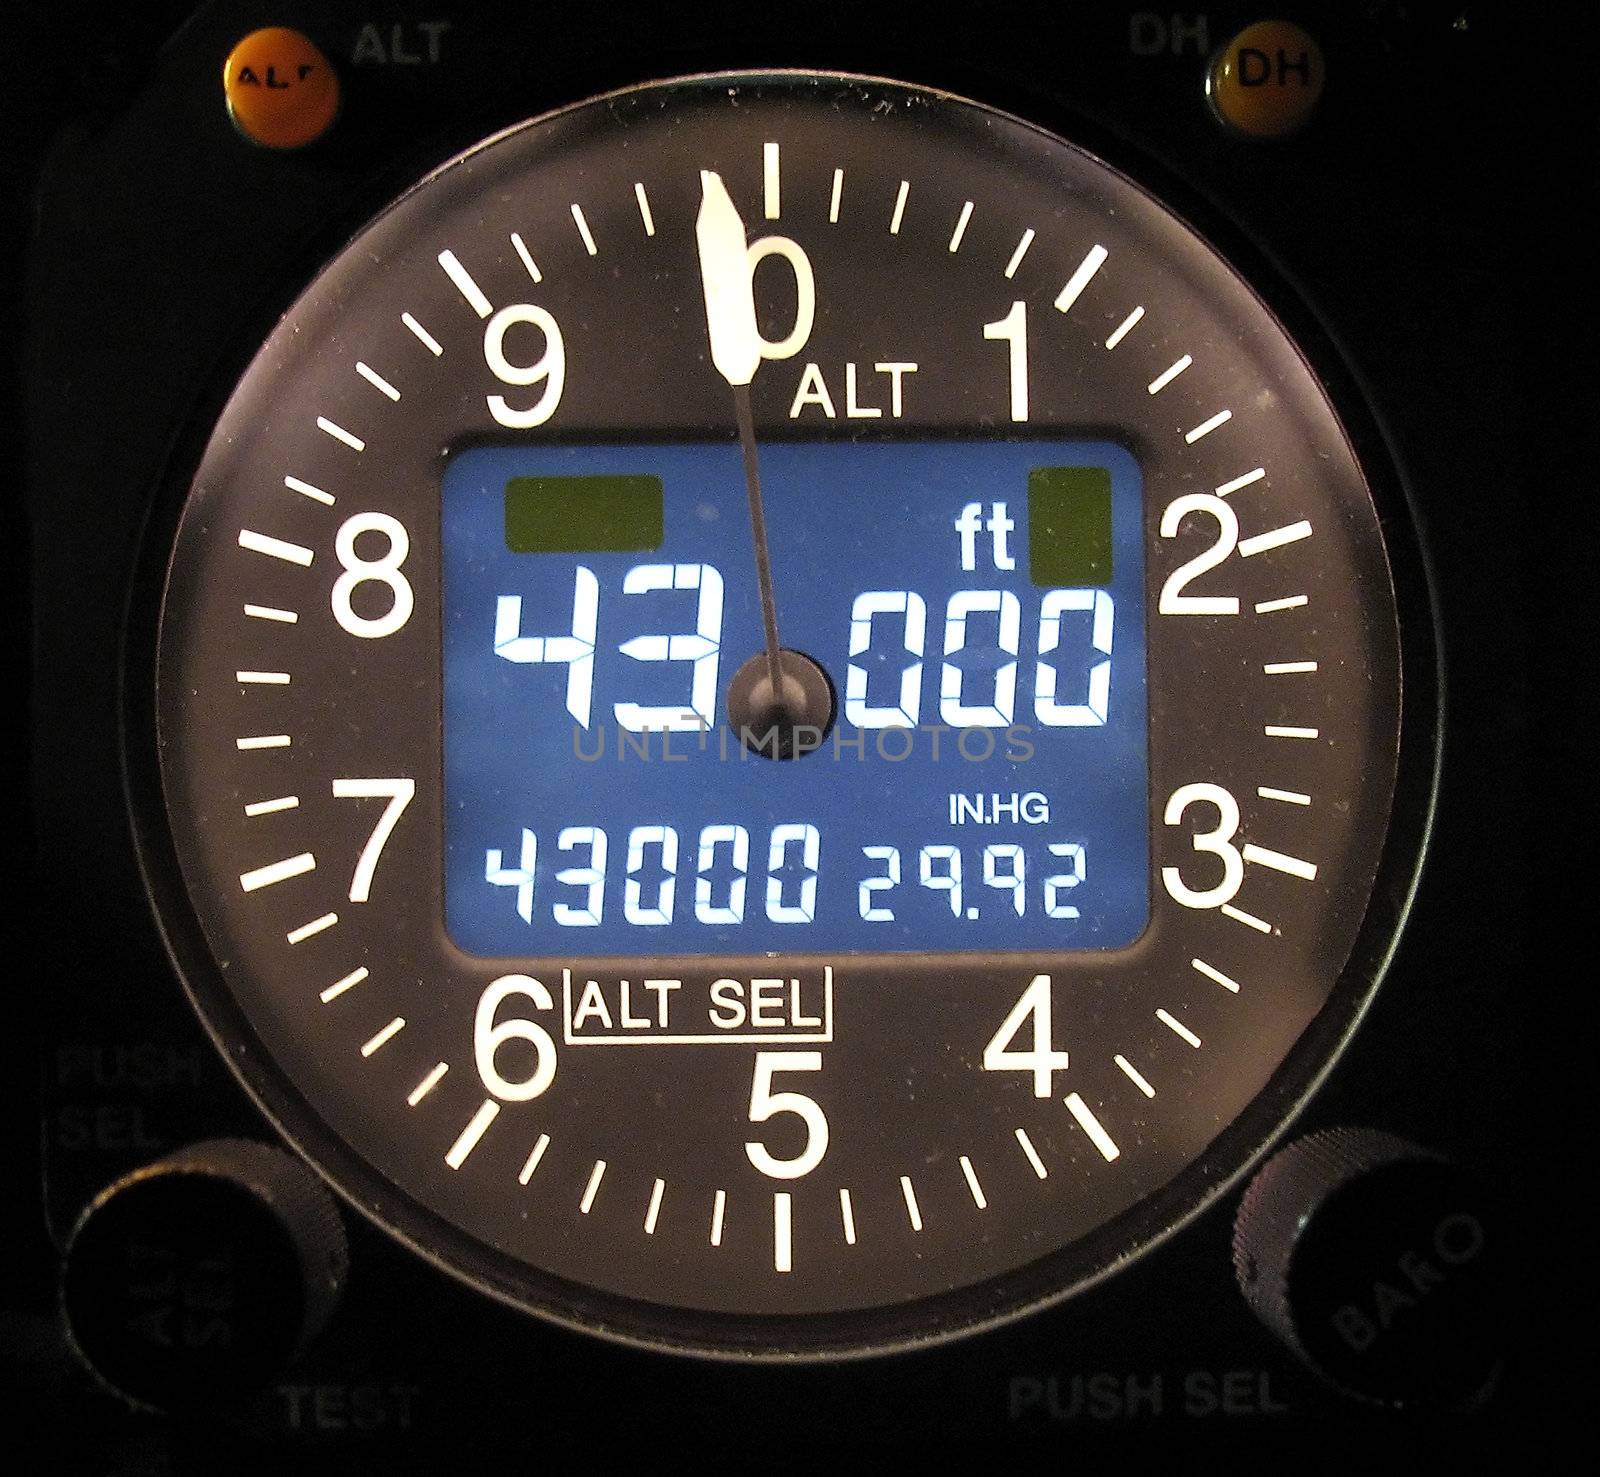 Electronic Aircraft altimeter showing a cruise altitude of 43000 feet.